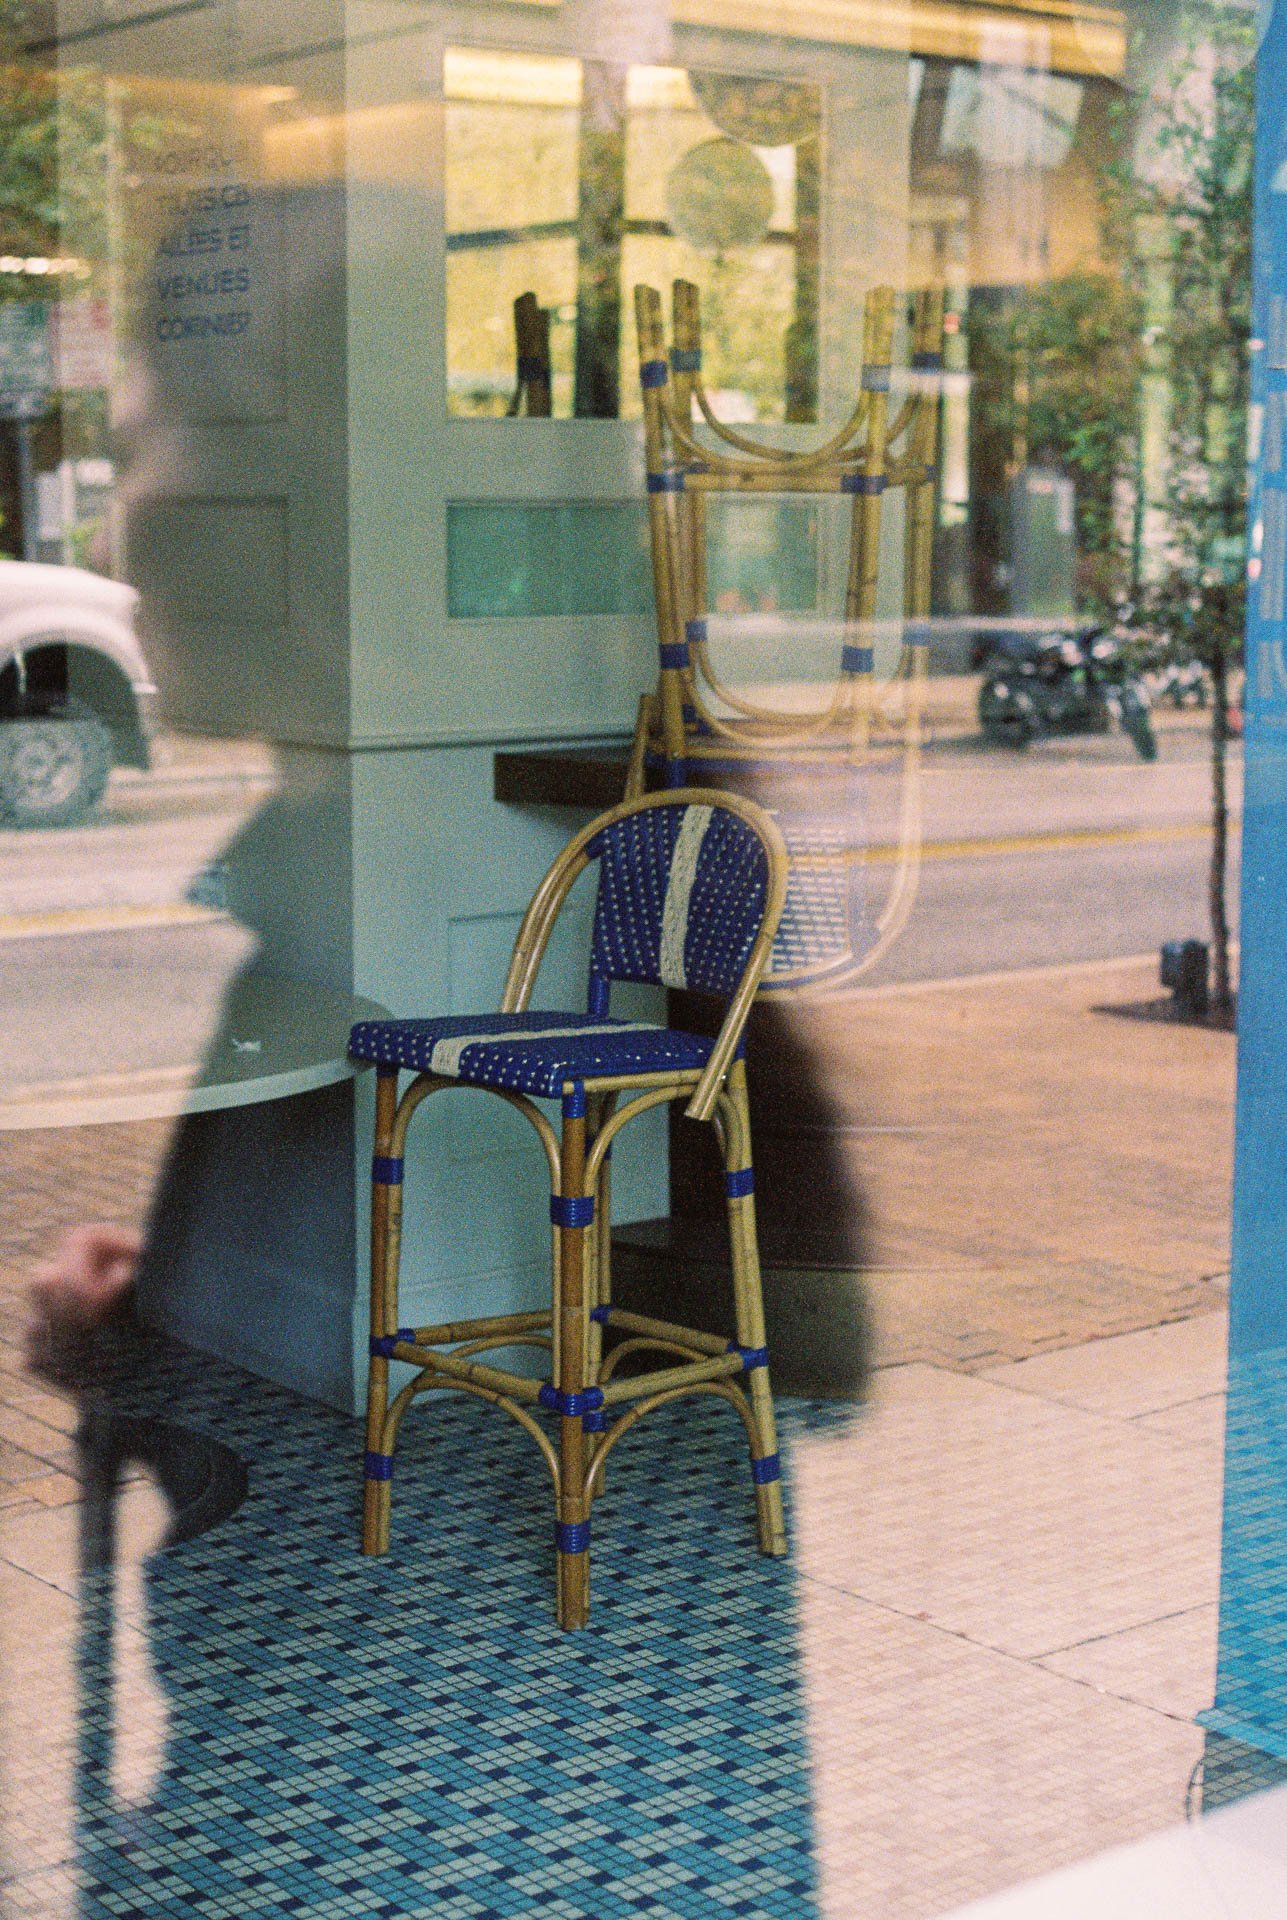 Aimee-Anderson-Window-Reflections-with-Stacked-Blue-Chairs-in-Downtown-Austin-on-Film-1.jpg